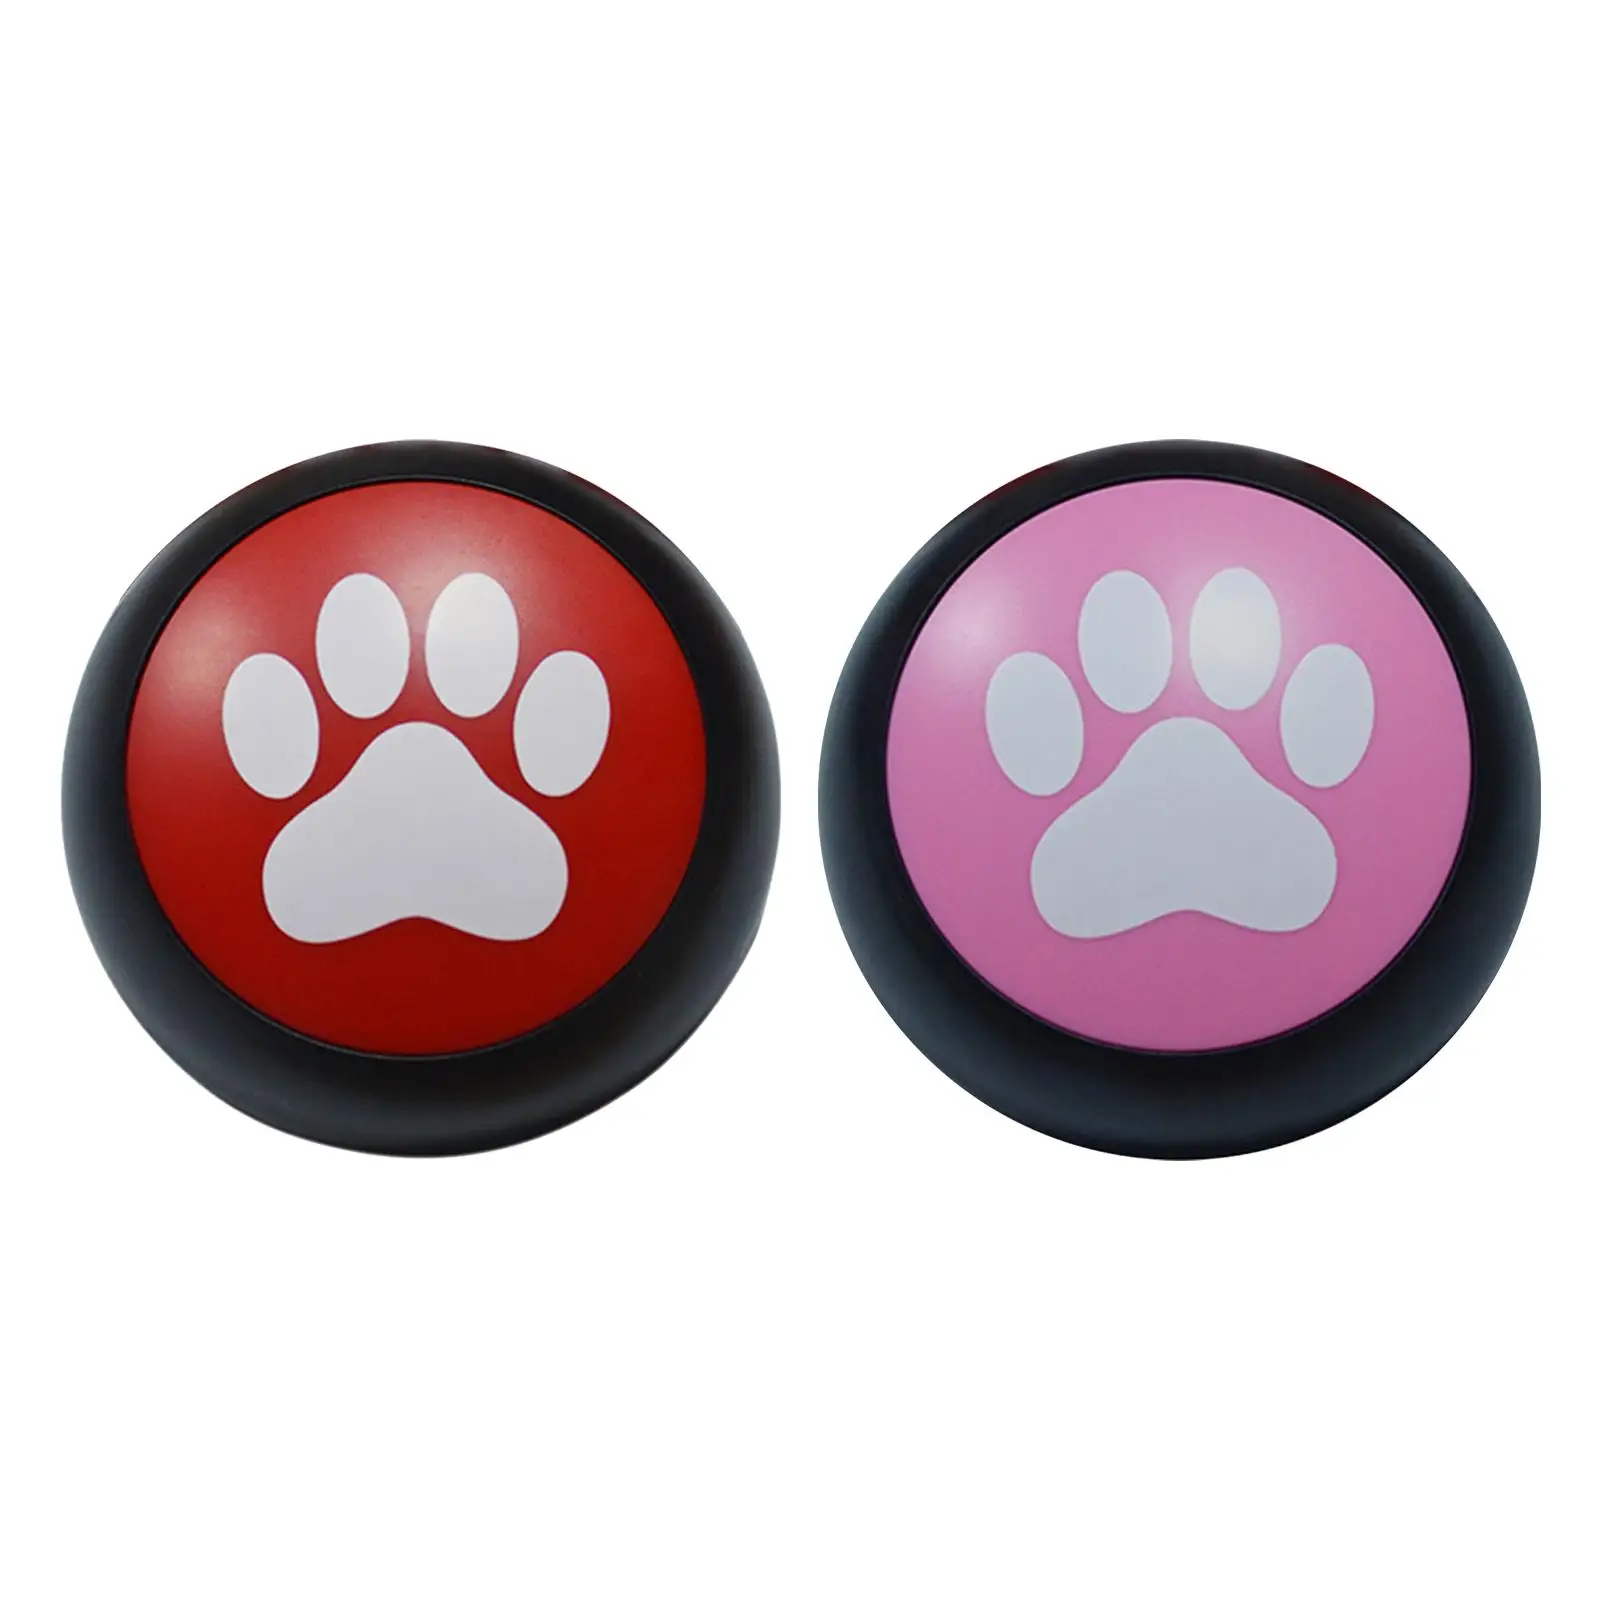 Recordable Sound Button Communication Educational Toy Recorder Playback Recording Sound Button Child Learning Pet Training